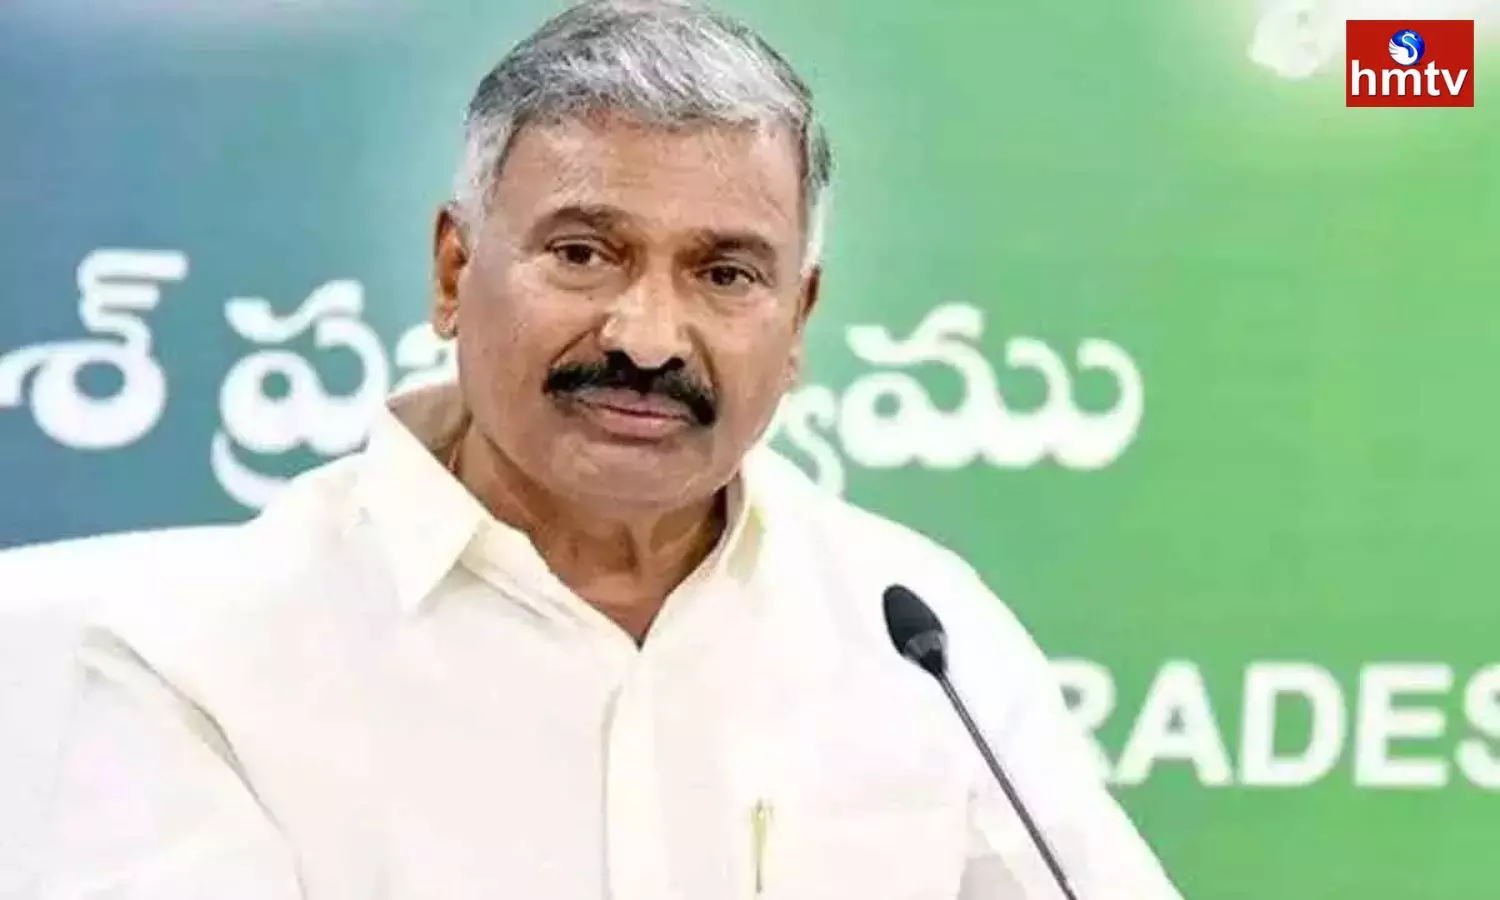 There Is No Chance For Electricity Workers To Go On Strike Says Peddireddy